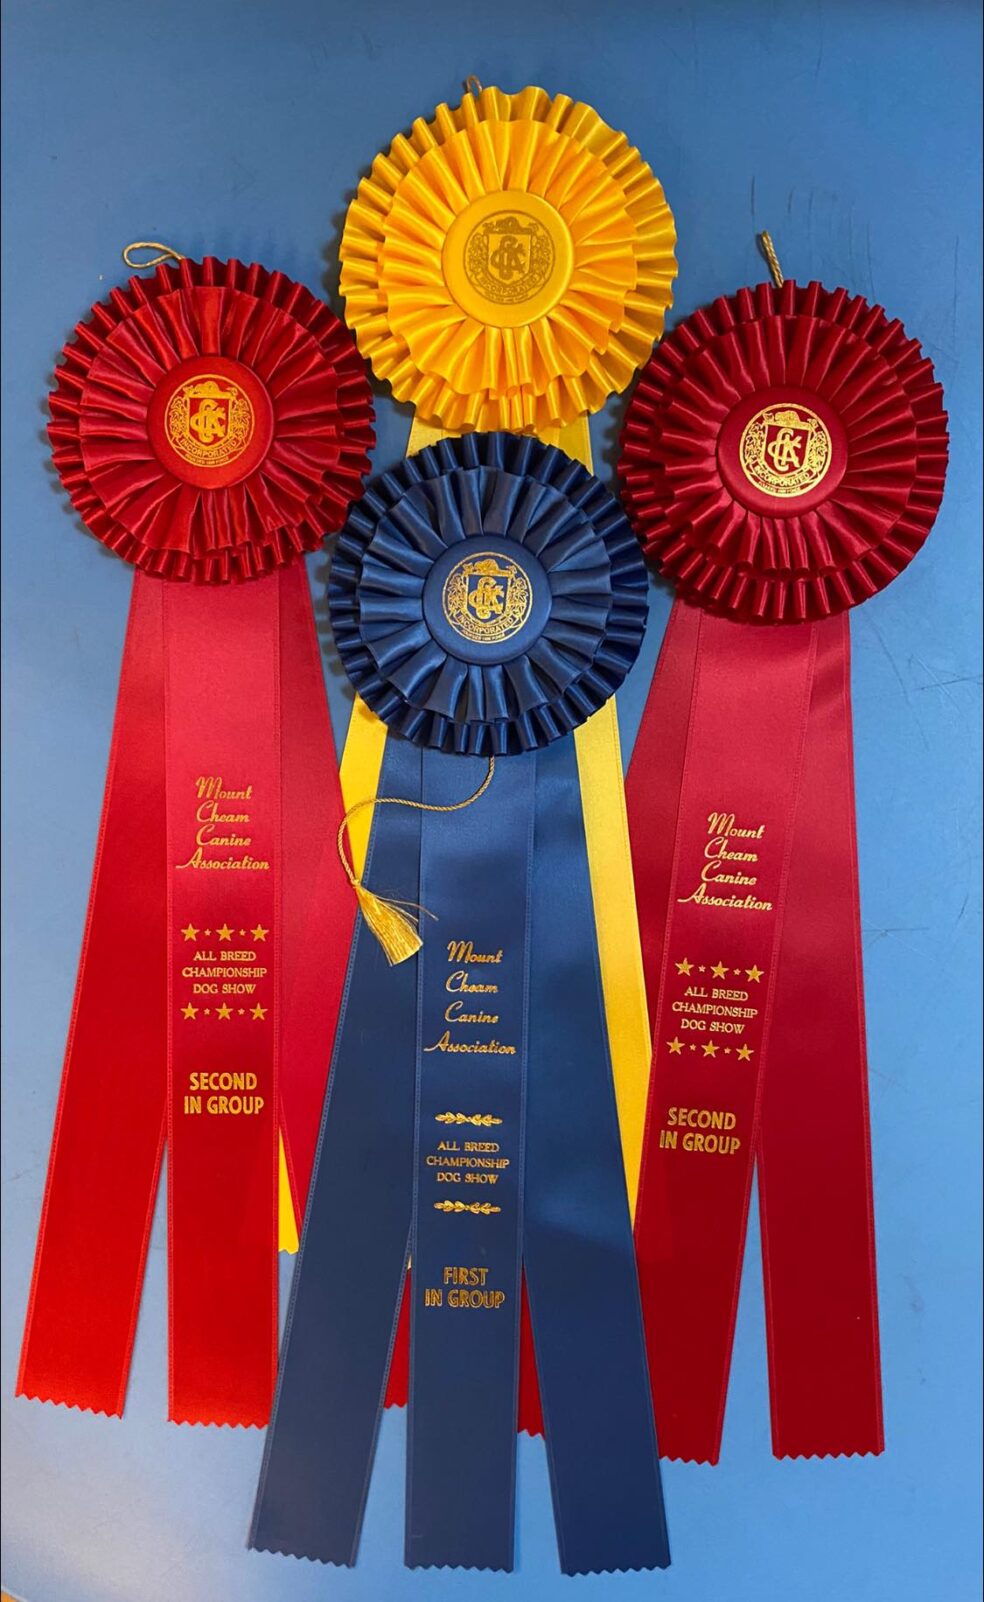 Dog Show Ribbons in Yellow, Blue, Red